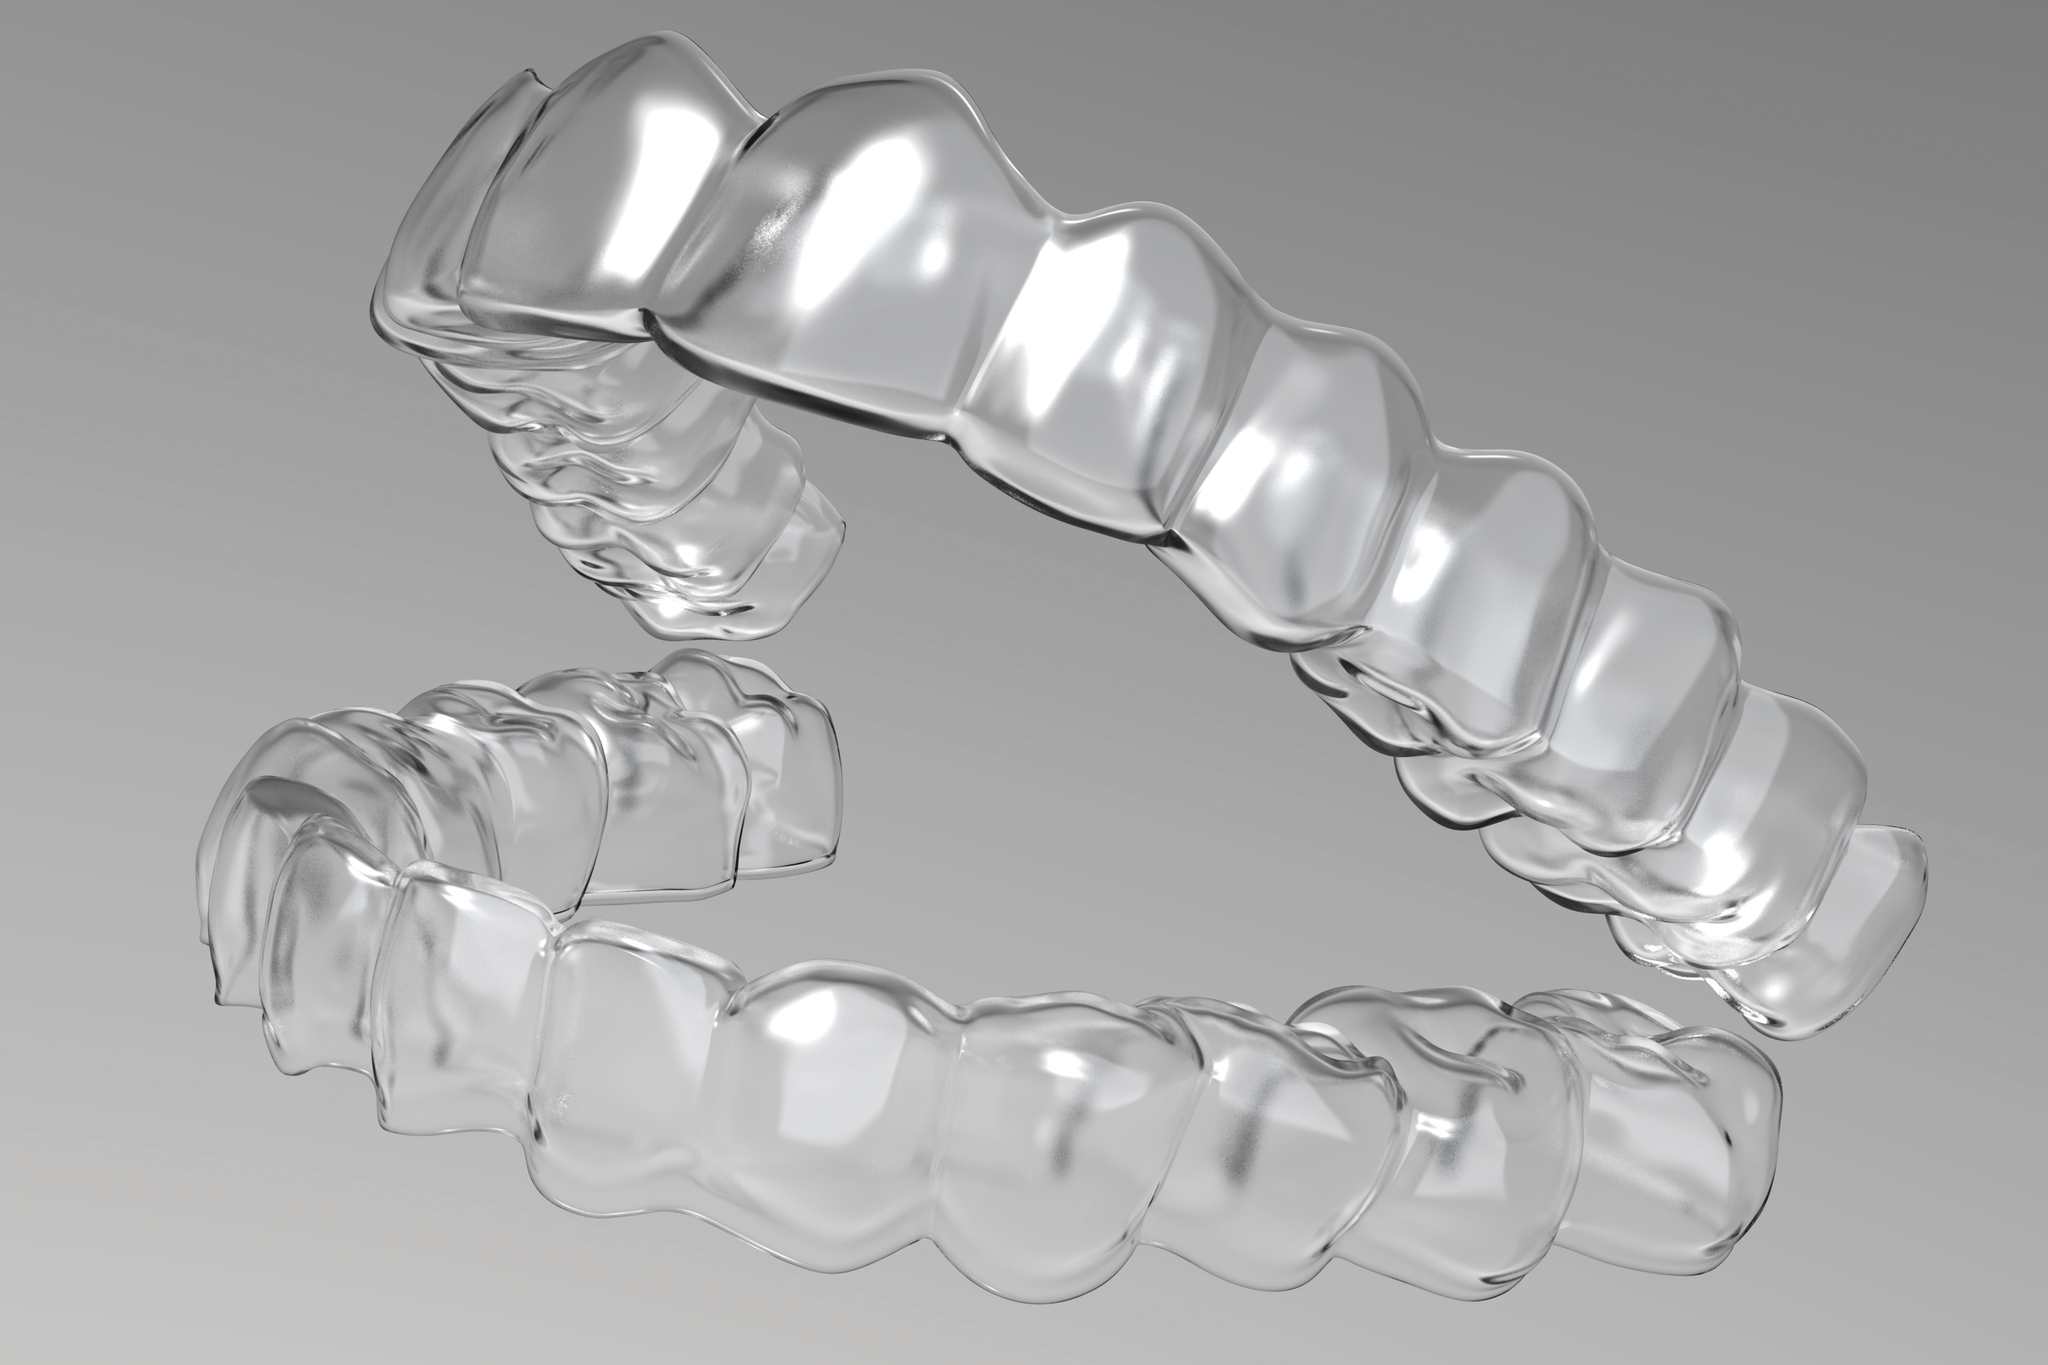 Straightening with clear aligners